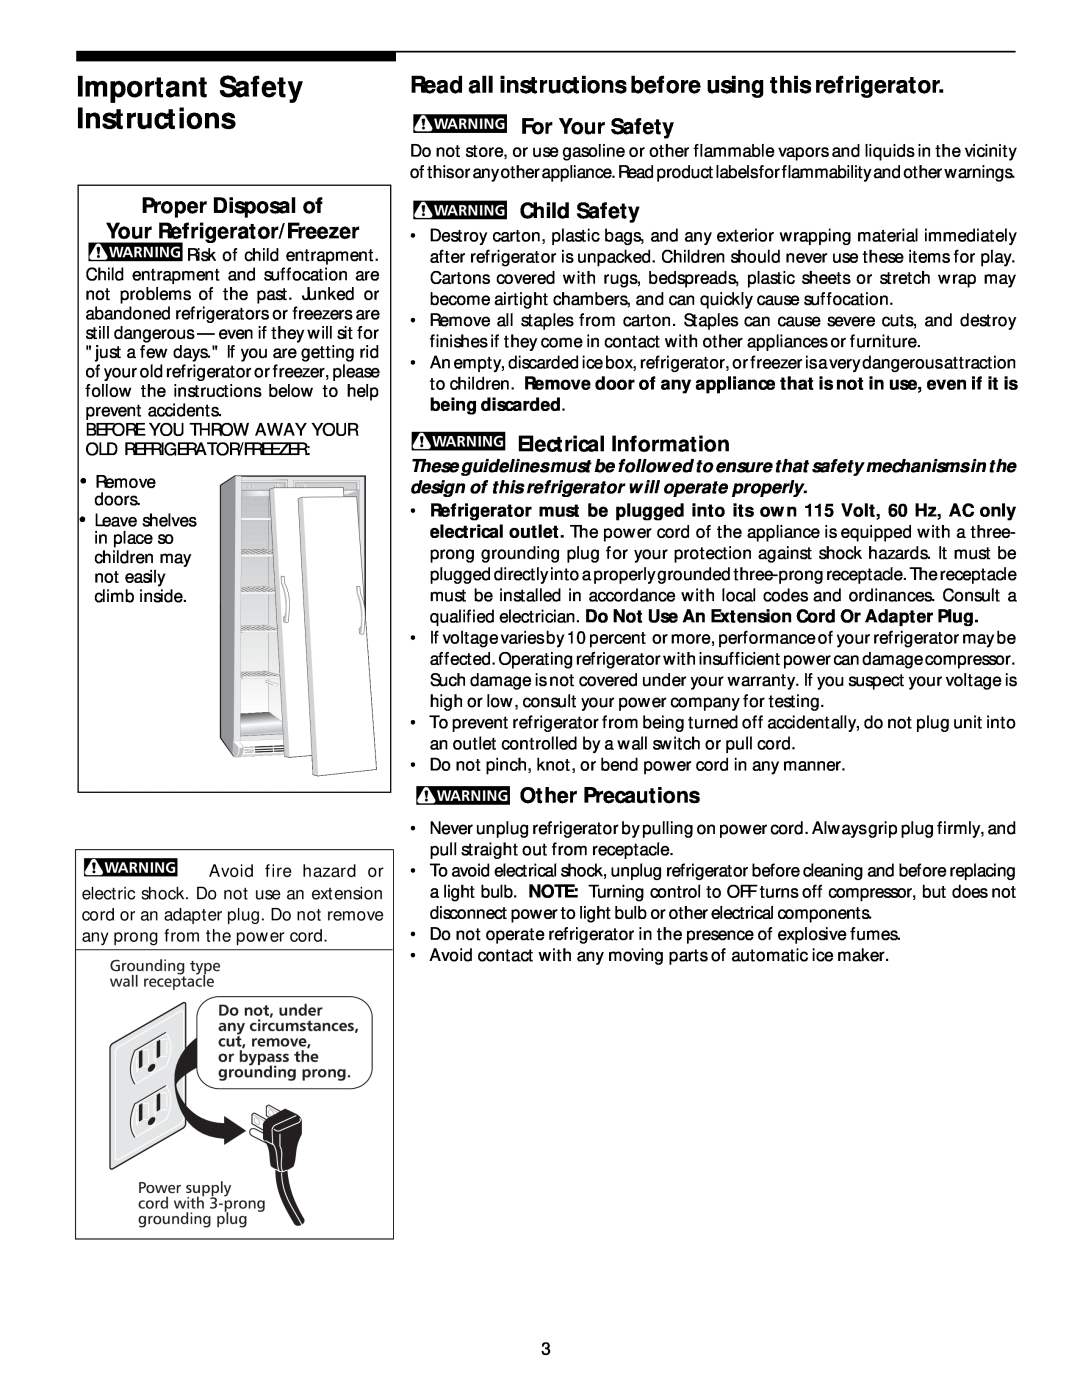 Frigidaire 218954901 manual Important Safety Instructions, For Your Safety, Proper Disposal of Your Refrigerator/Freezer 